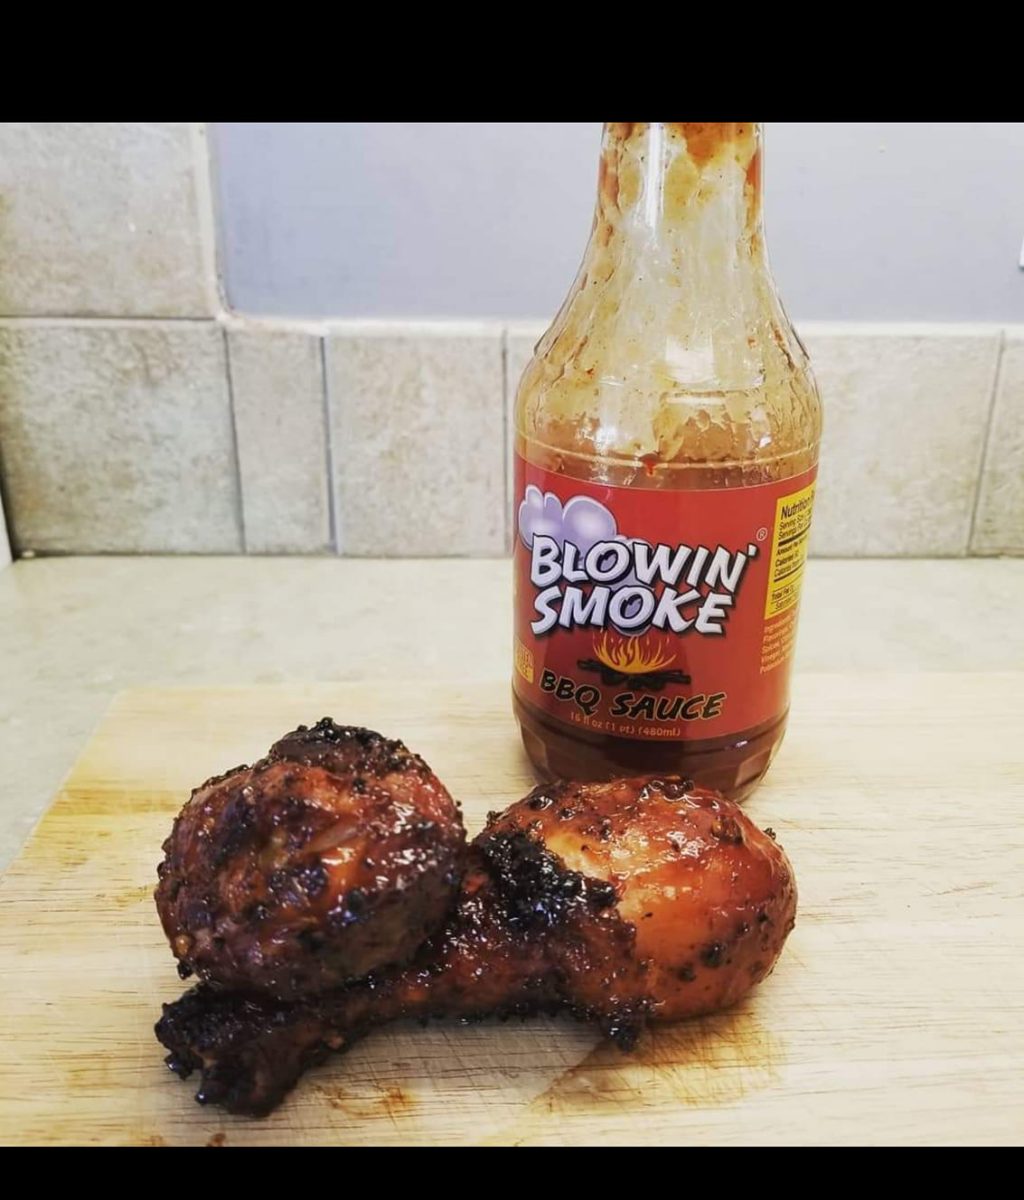 chicken legs covered in Blowin smoke bbq sauce